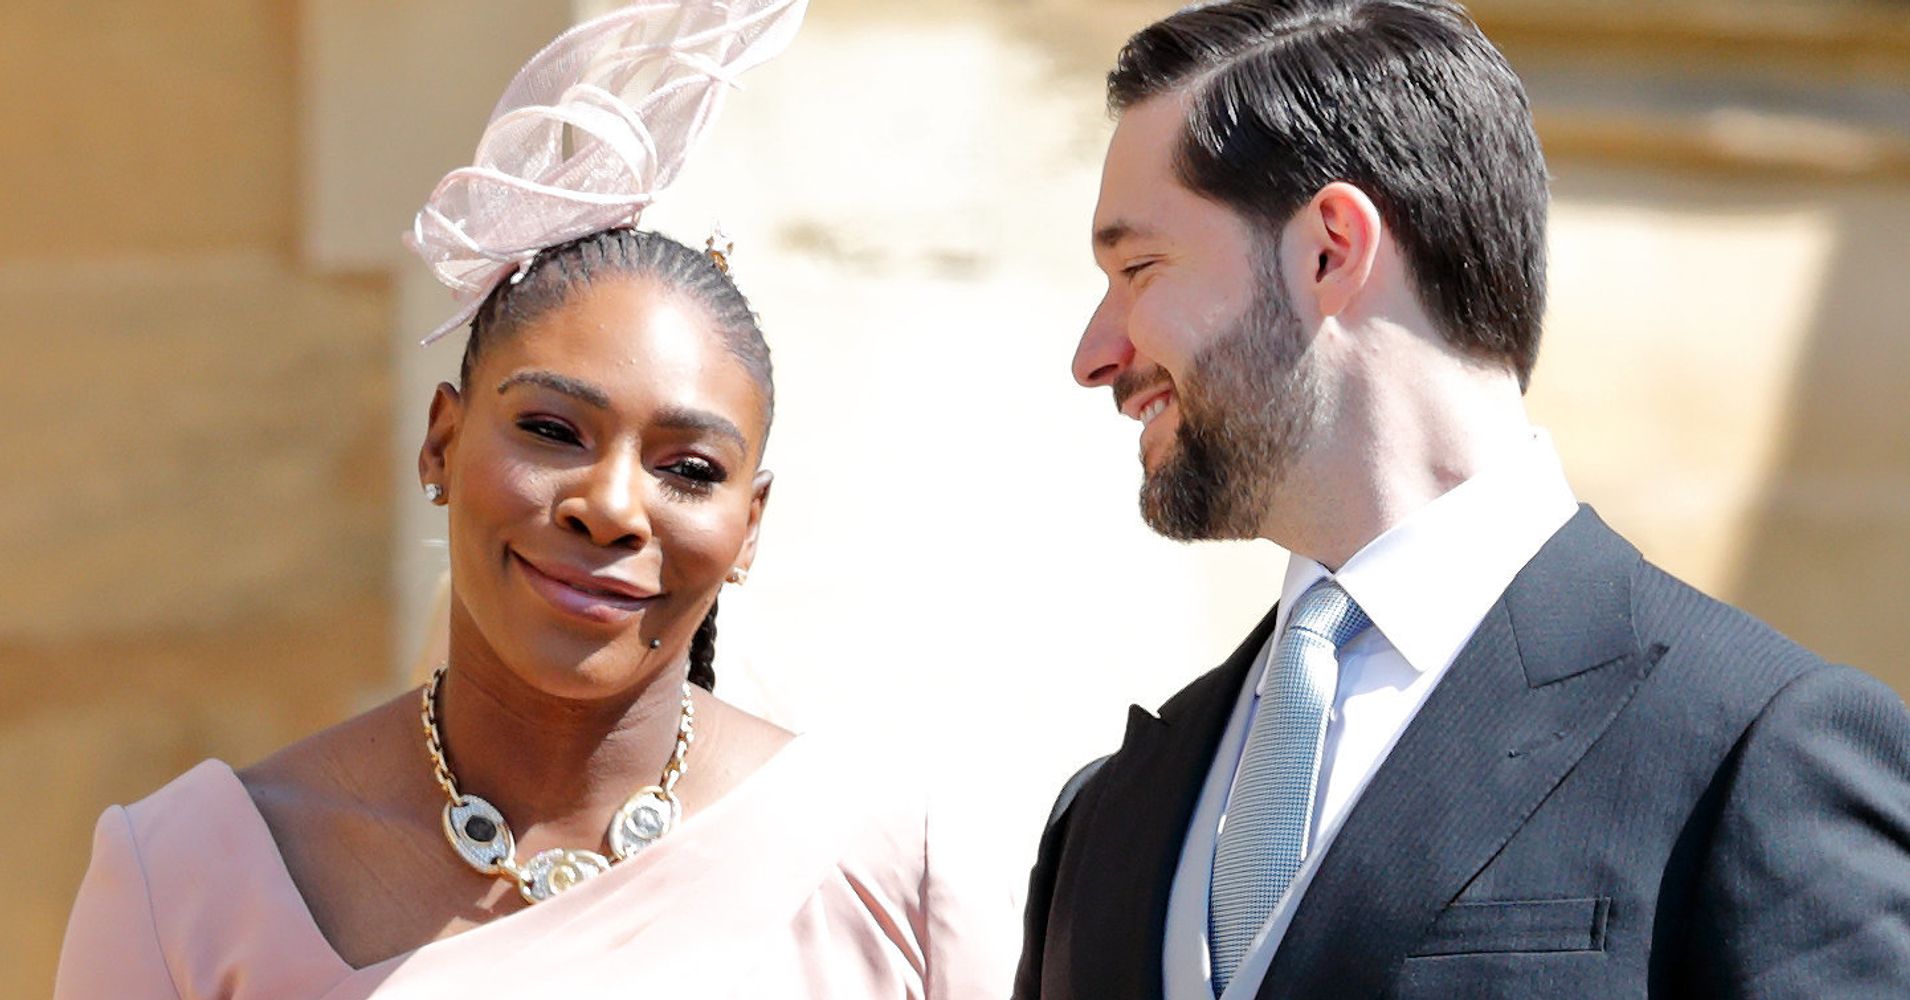 Alexis Ohanian's Video Tribute To Wife Serena Williams Is A Real Tearjerker | HuffPost1908 x 1000